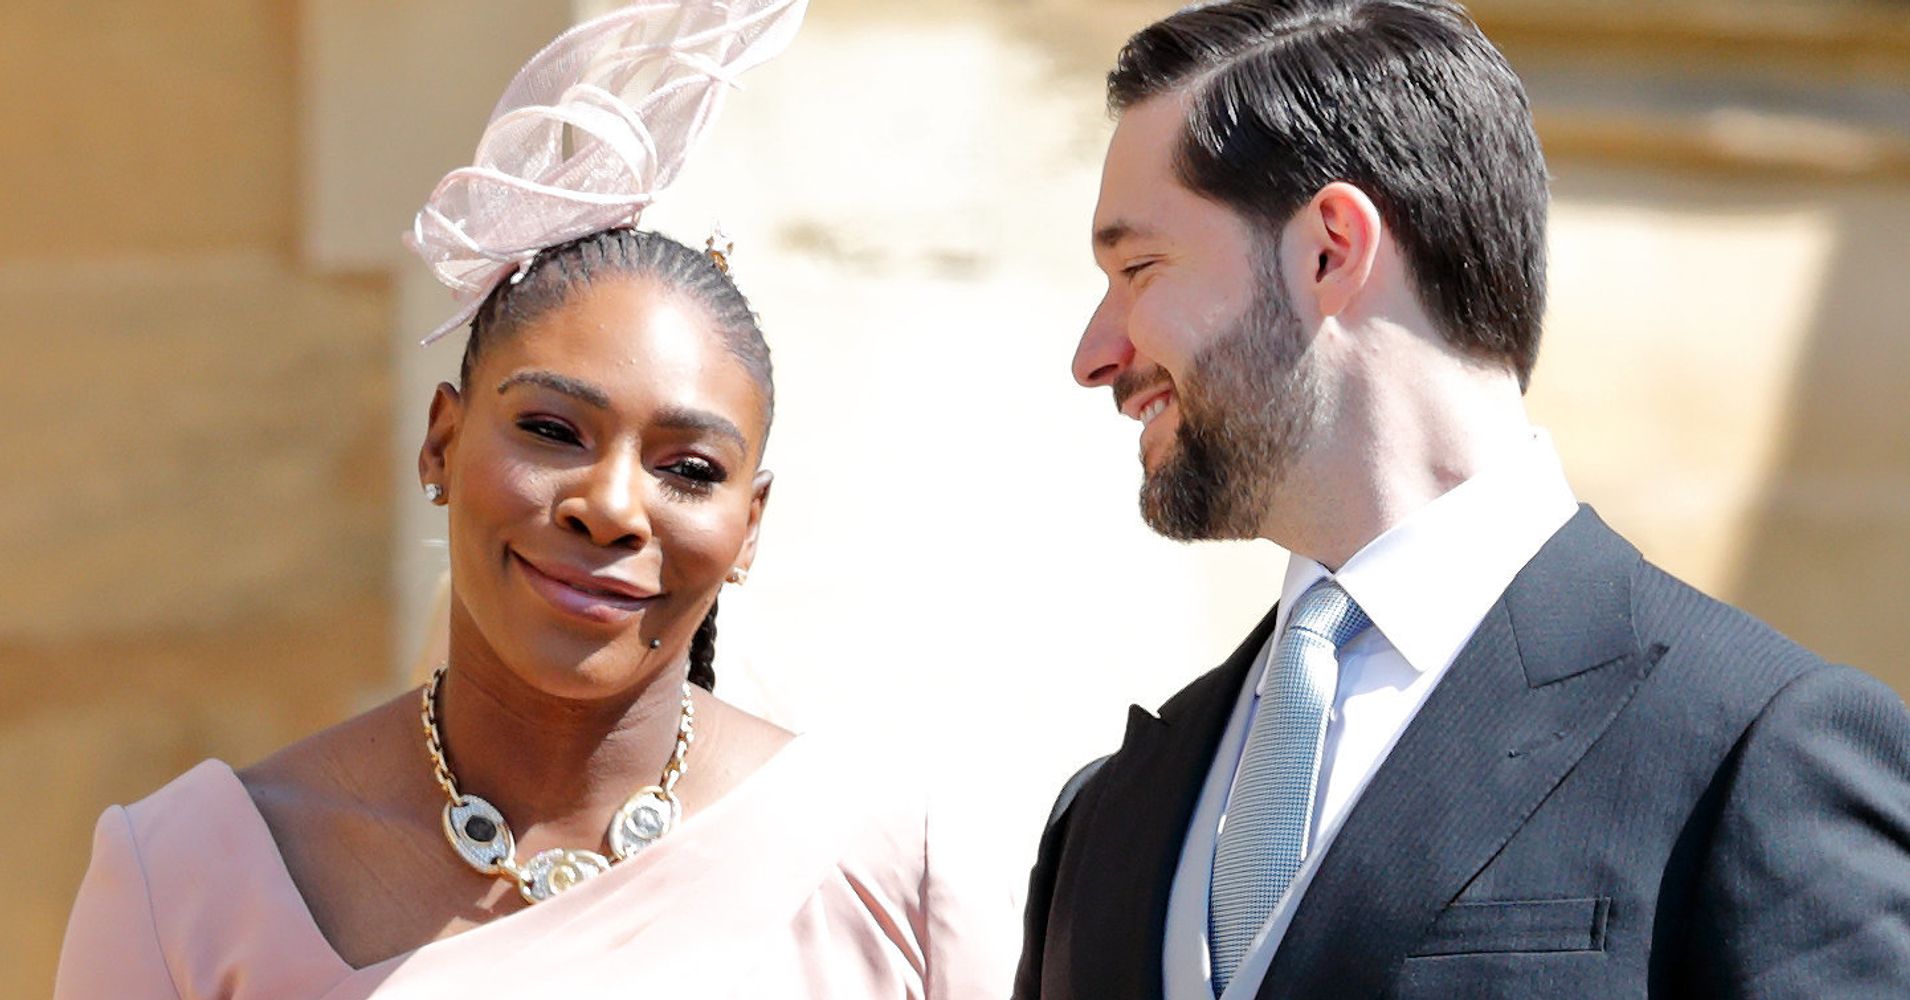 Alexis Ohanian's Video Tribute To Wife Serena Williams Is A Real Tearjerker | HuffPost1908 x 1000